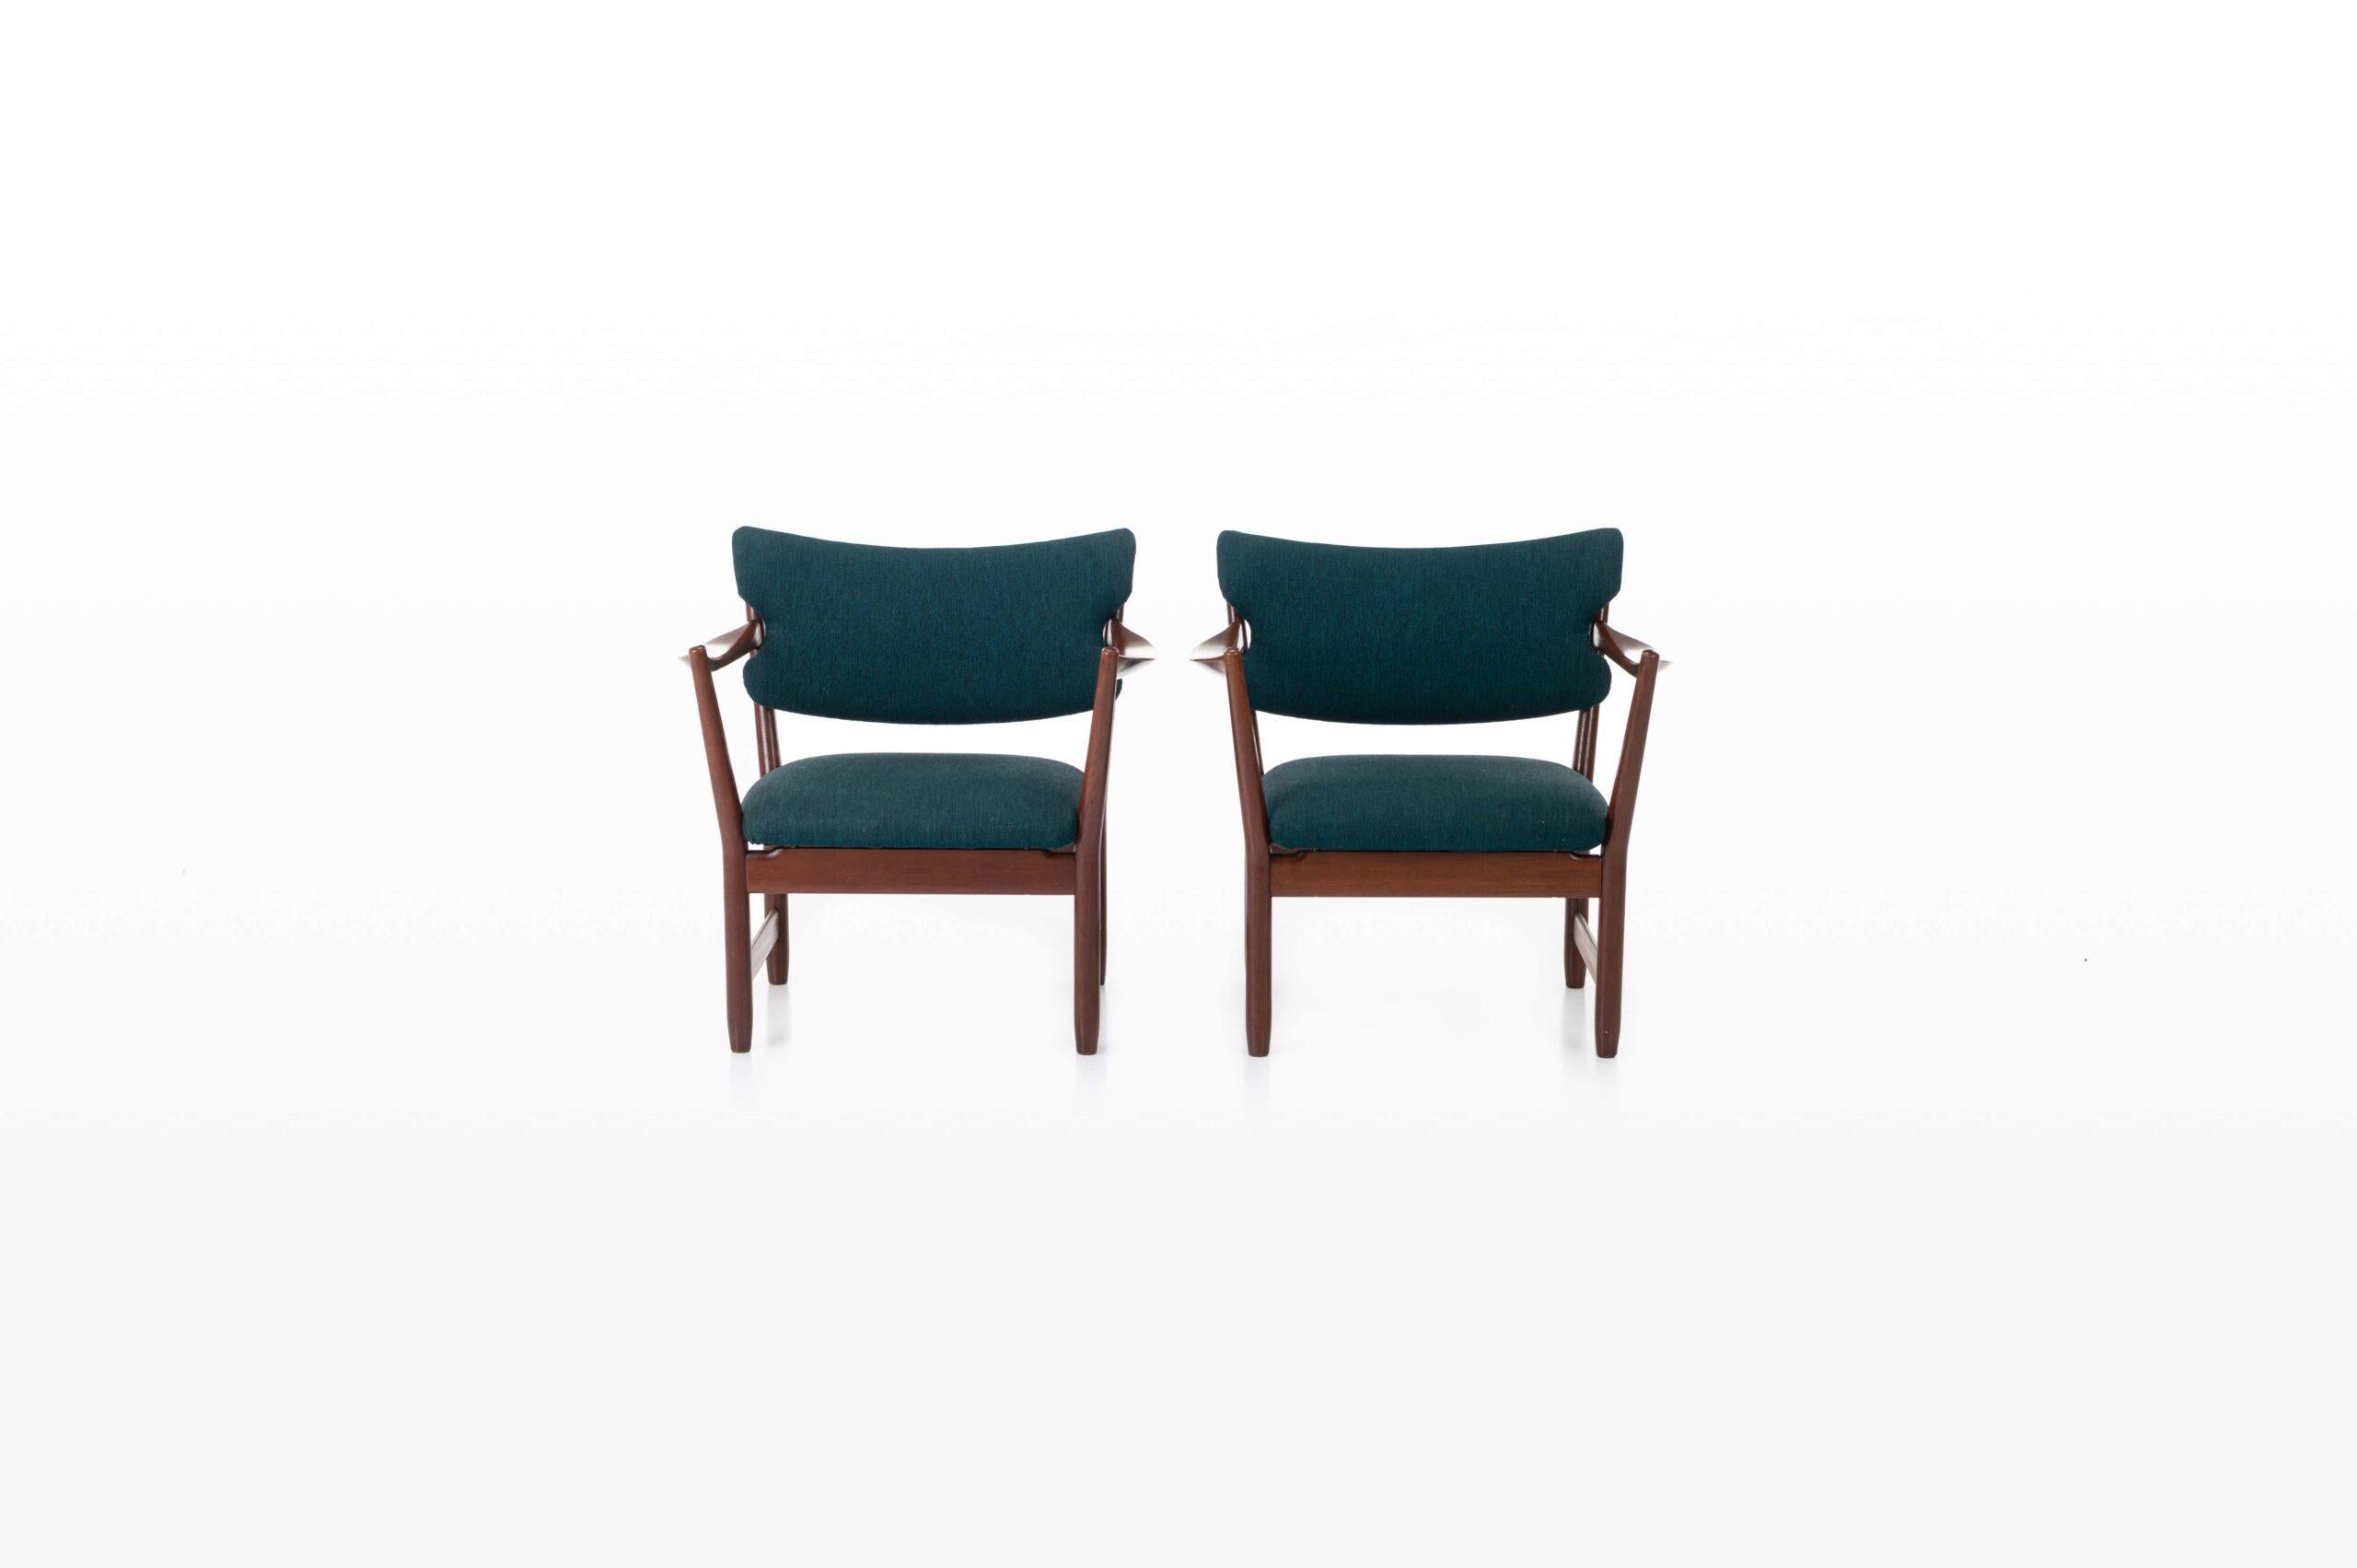 Beautiful set of two “Fire place” armchairs in teak. Designed by Fredrik Kayser and Adolf Relling for Dokka Møbler. Produced in Norway around 1958. The chairs have a teak frame and petrol blue upholstery.
 